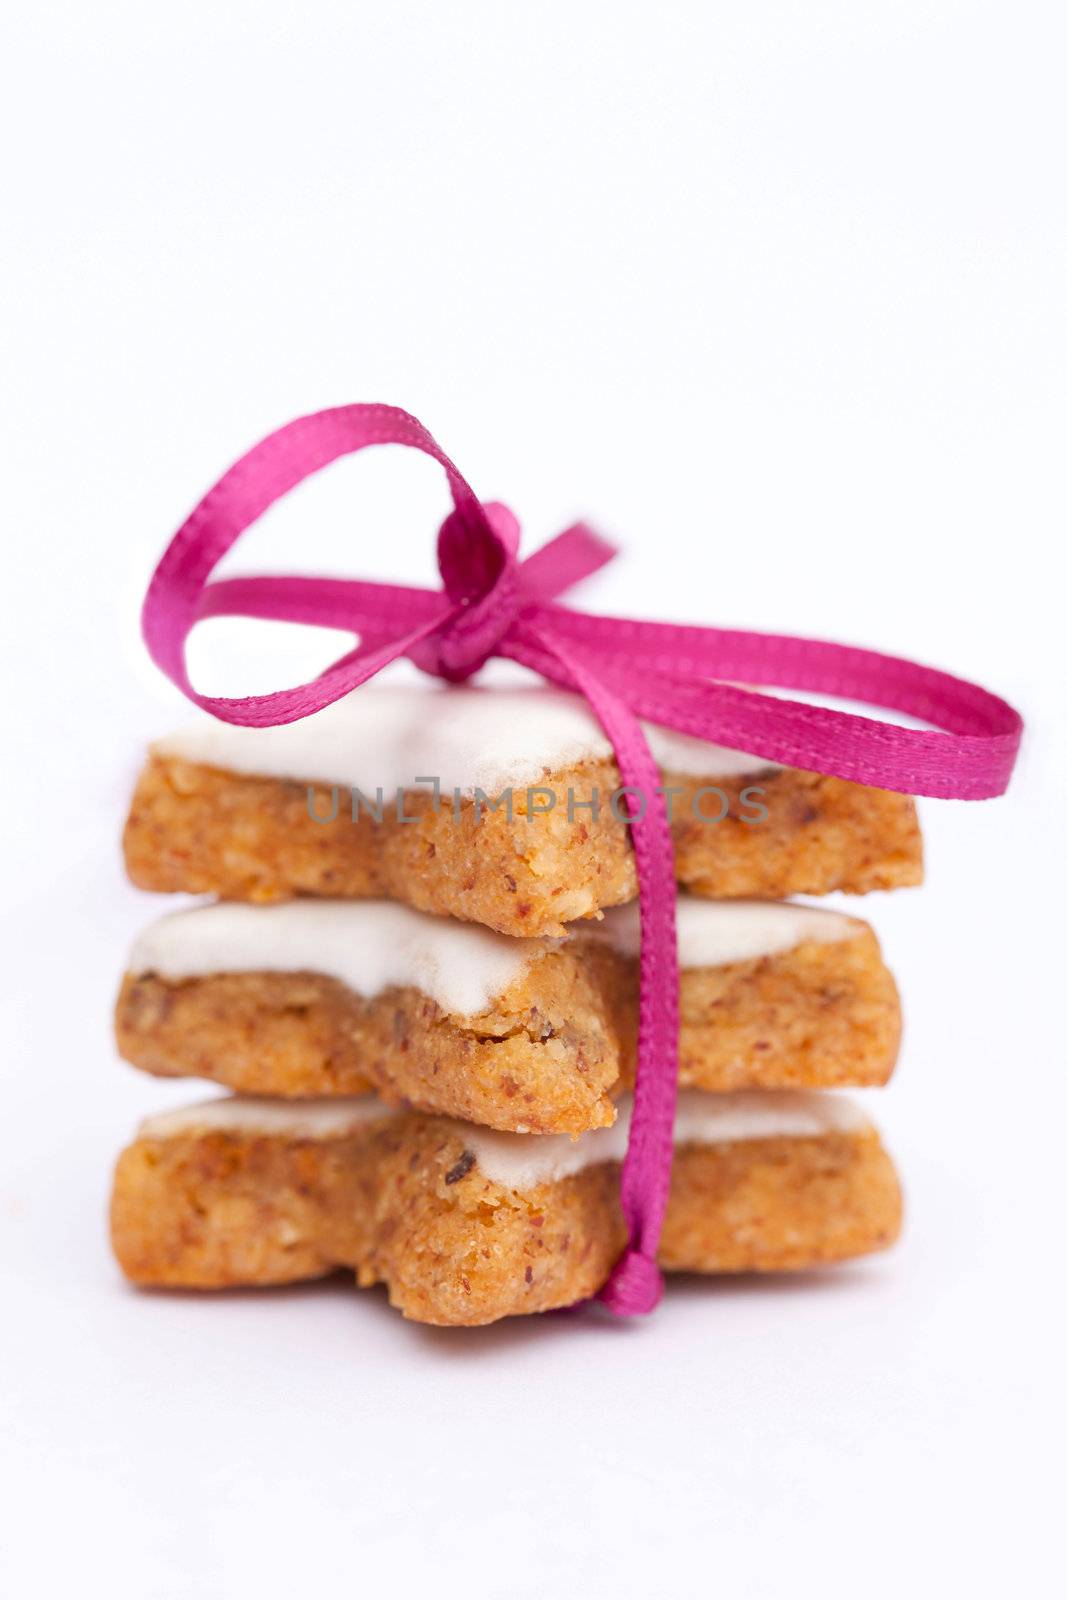 Cinnamon biscuits with pink ribbon